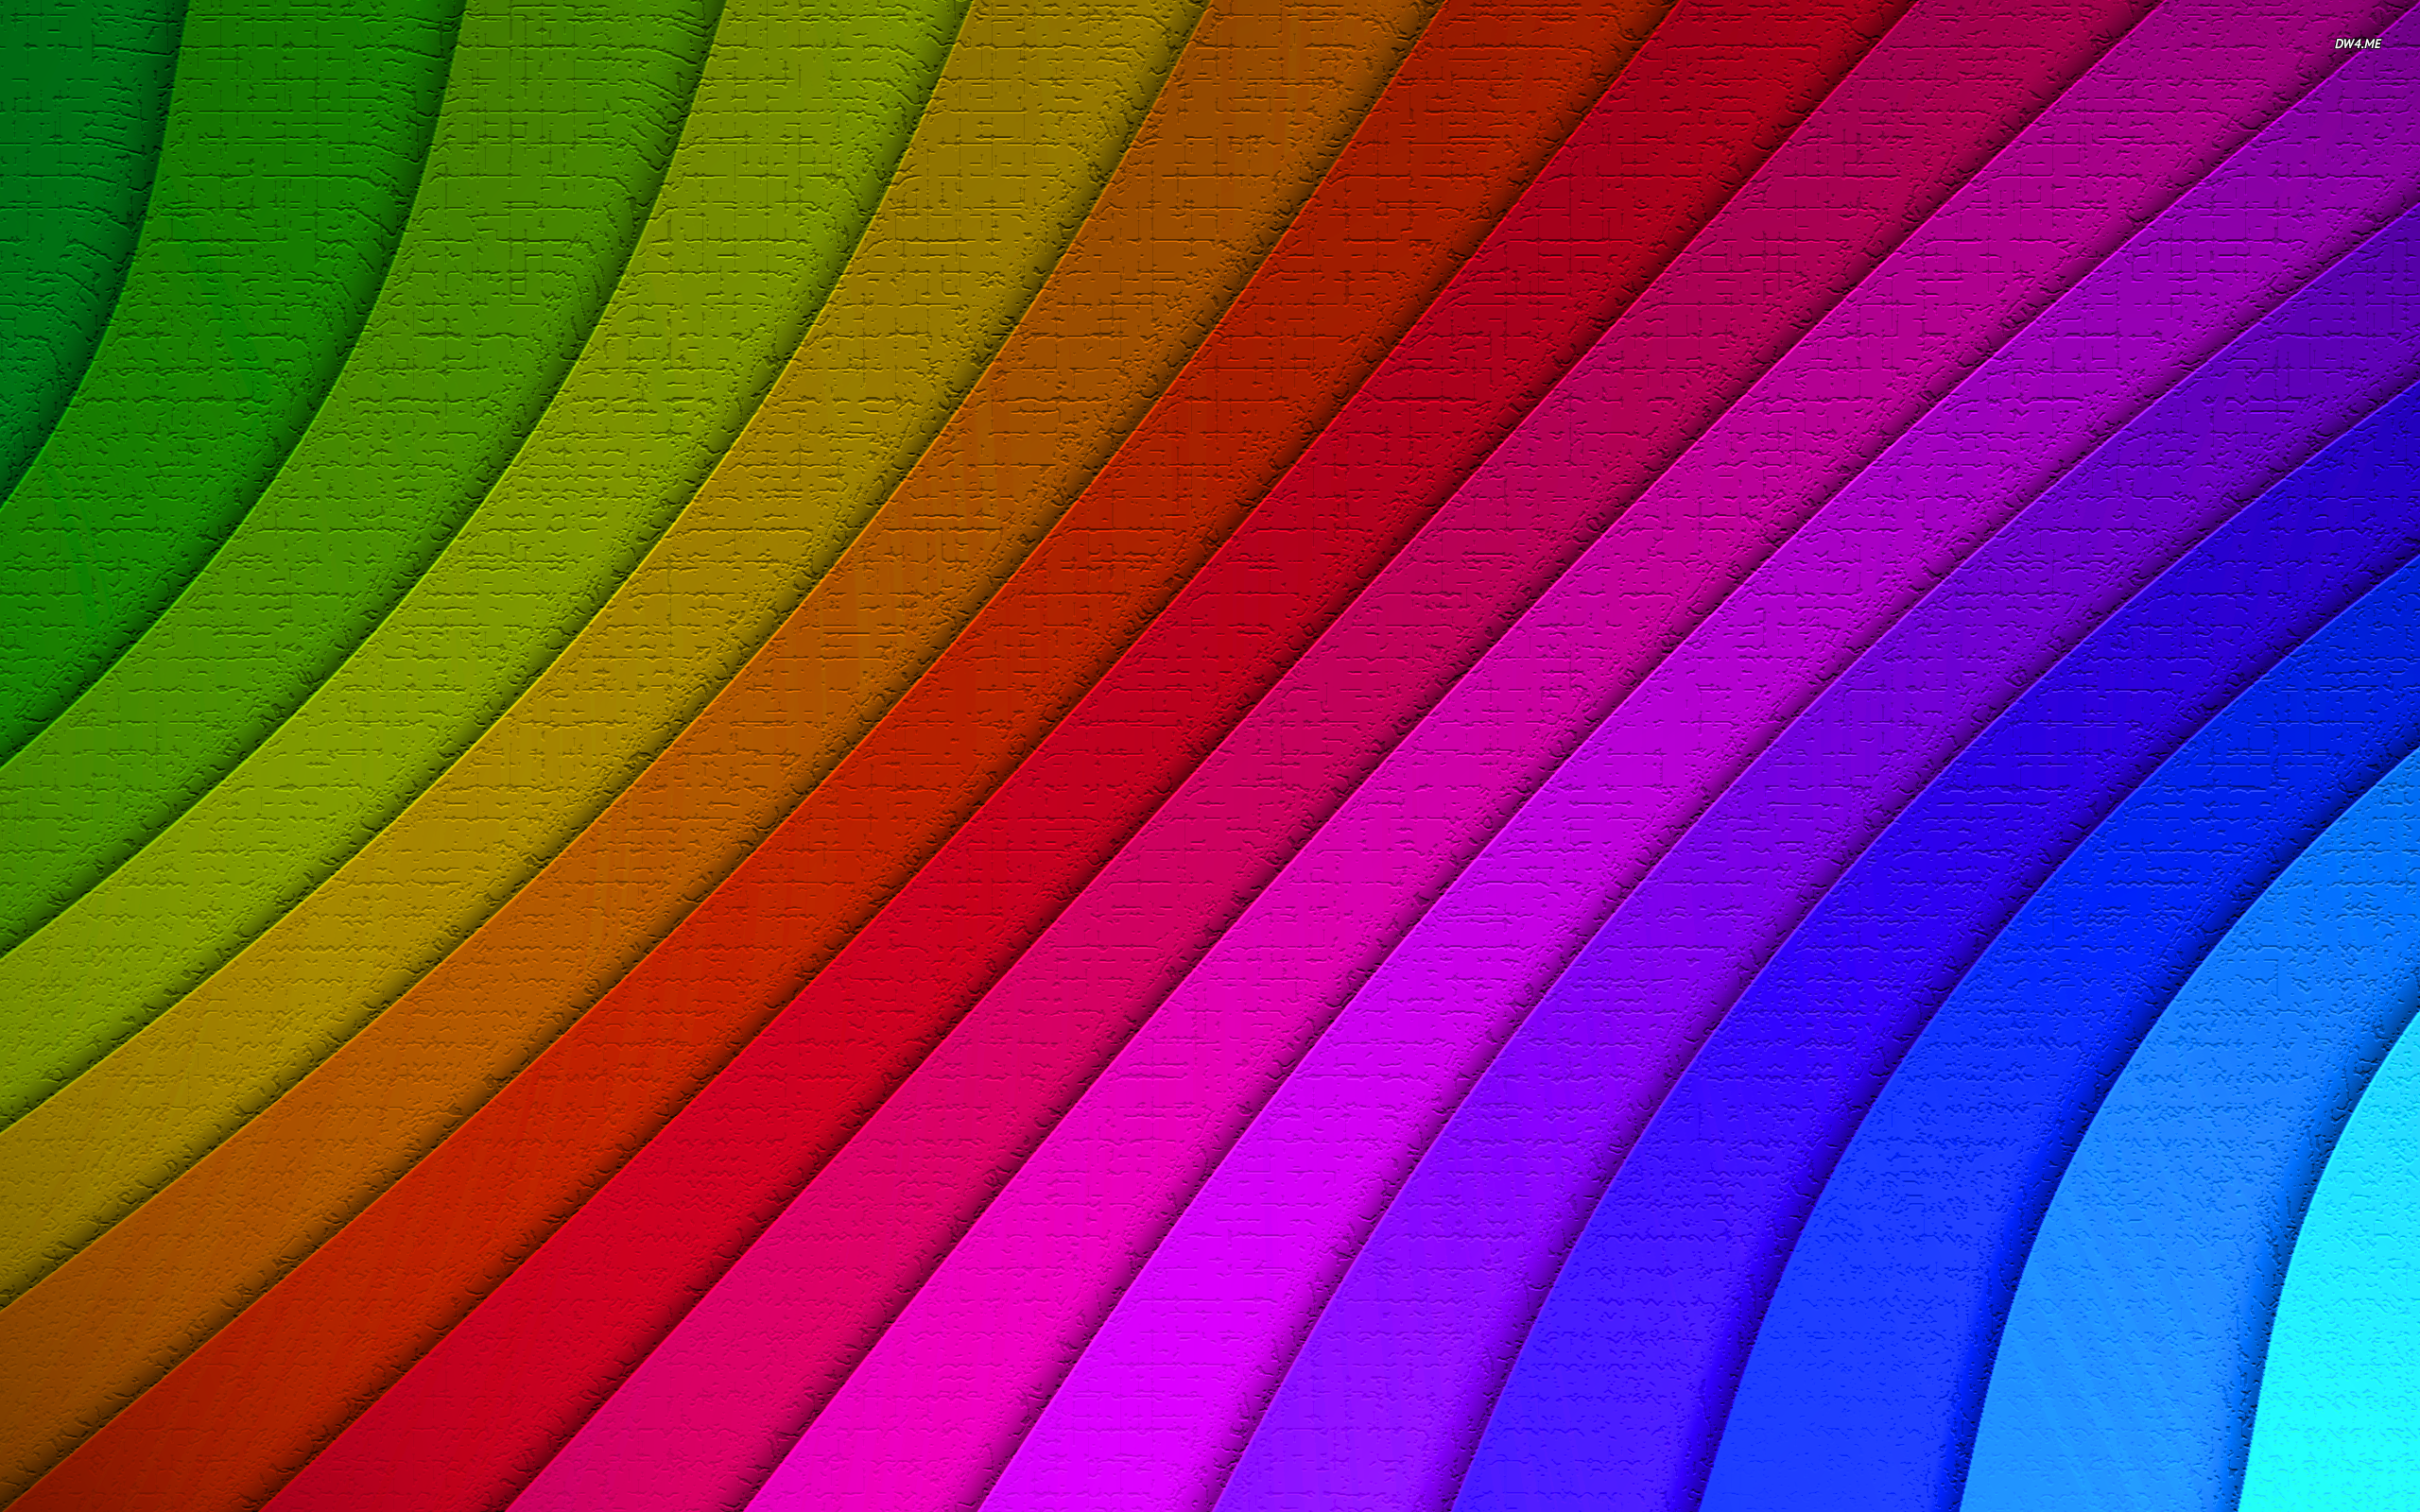 173-textured-colored-curved-lines-2560x1600-abstract-wallpaper.png